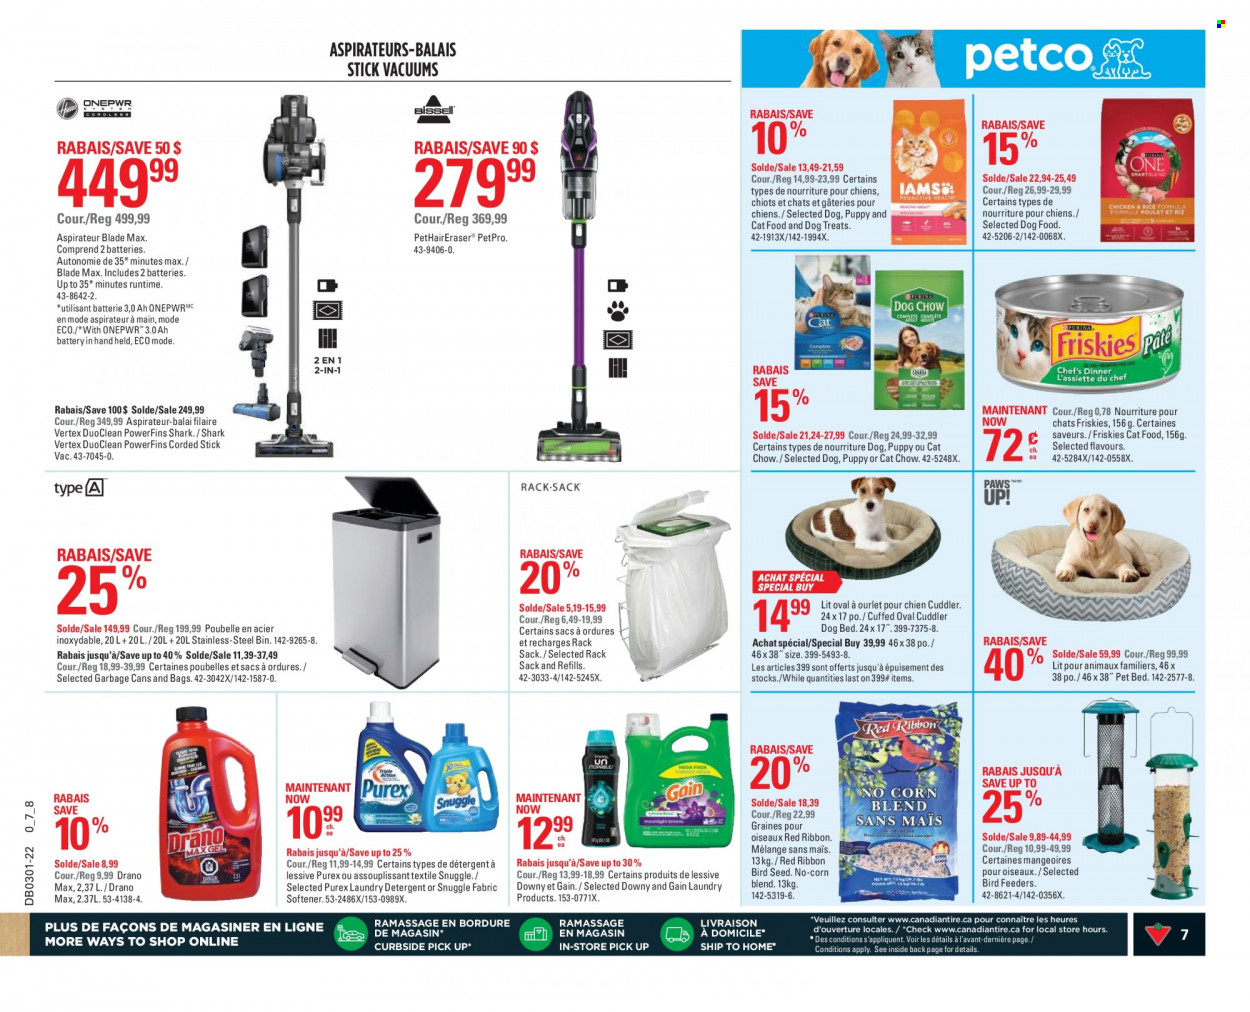 thumbnail - Canadian Tire Flyer - December 30, 2021 - January 05, 2022 - Sales products - Snuggle, fabric softener, laundry detergent, Purex, bag, bin, ribbon, dog bed, pet bed, bird feeder, animal food, bird food, cat food, dog food, Dog Chow, plant seeds, Friskies, Iams, detergent. Page 7.